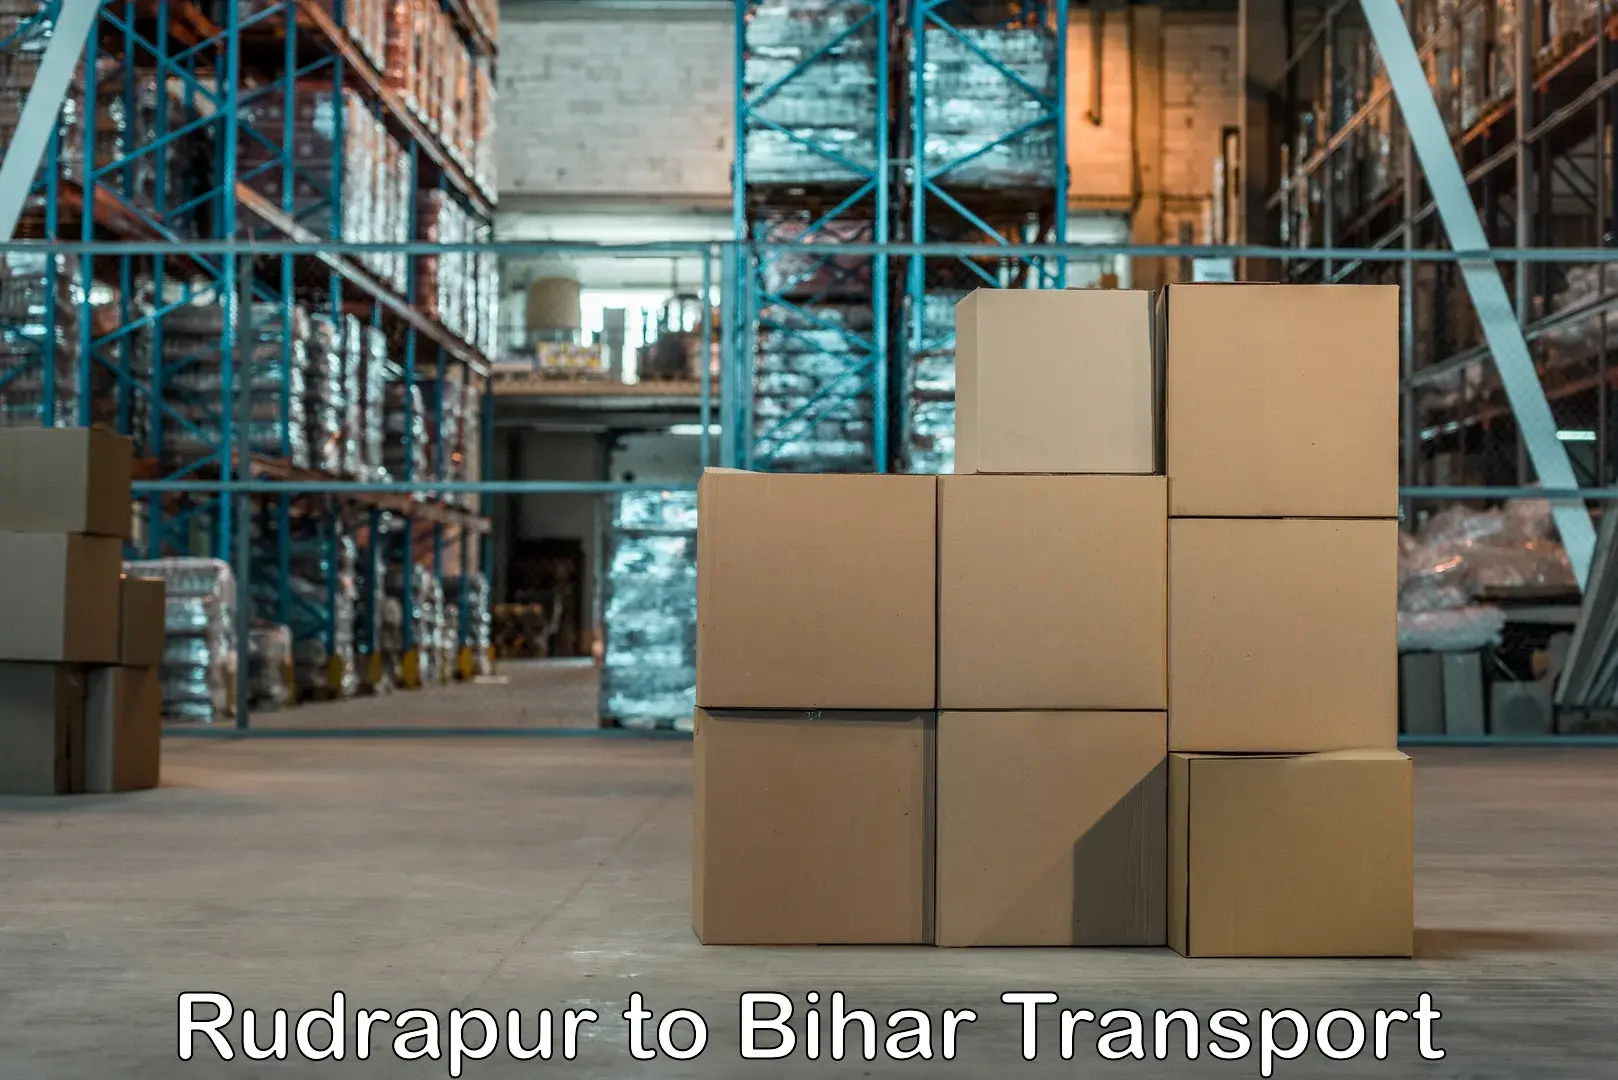 Land transport services in Rudrapur to Bihar